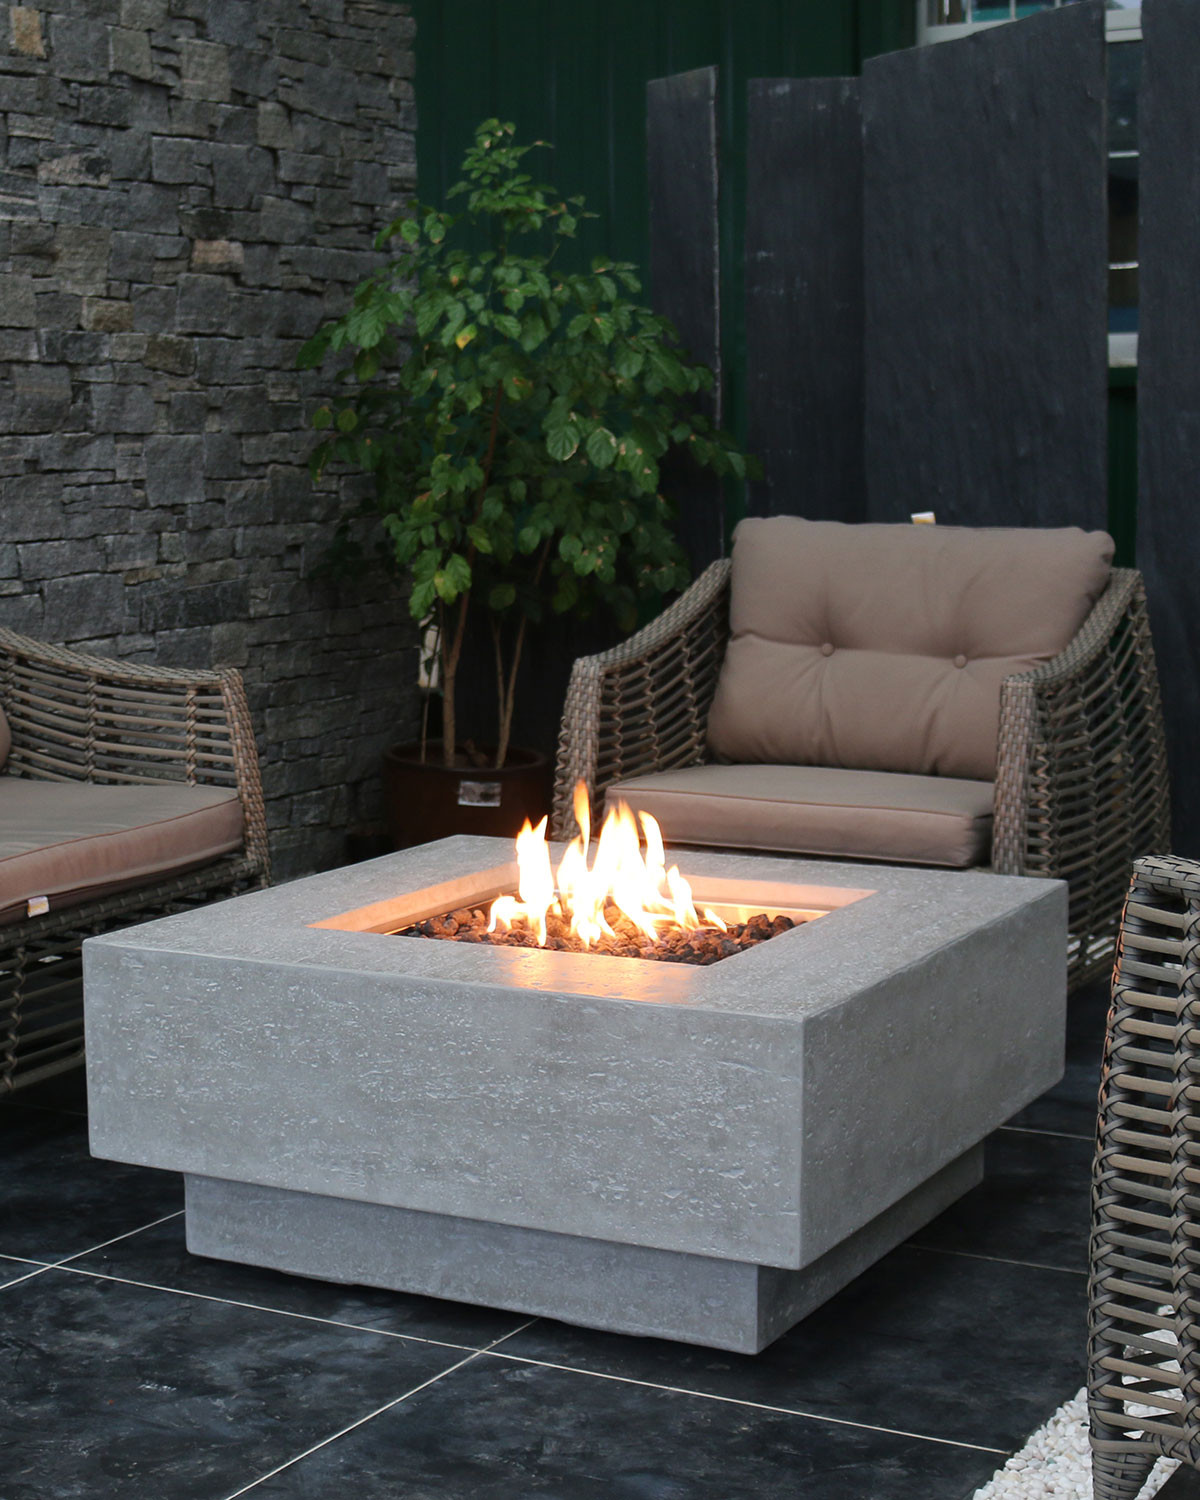 Patio Table With Fire Pit
 Elementi Manhattan Outdoor Fire Pit Table with Natural Gas